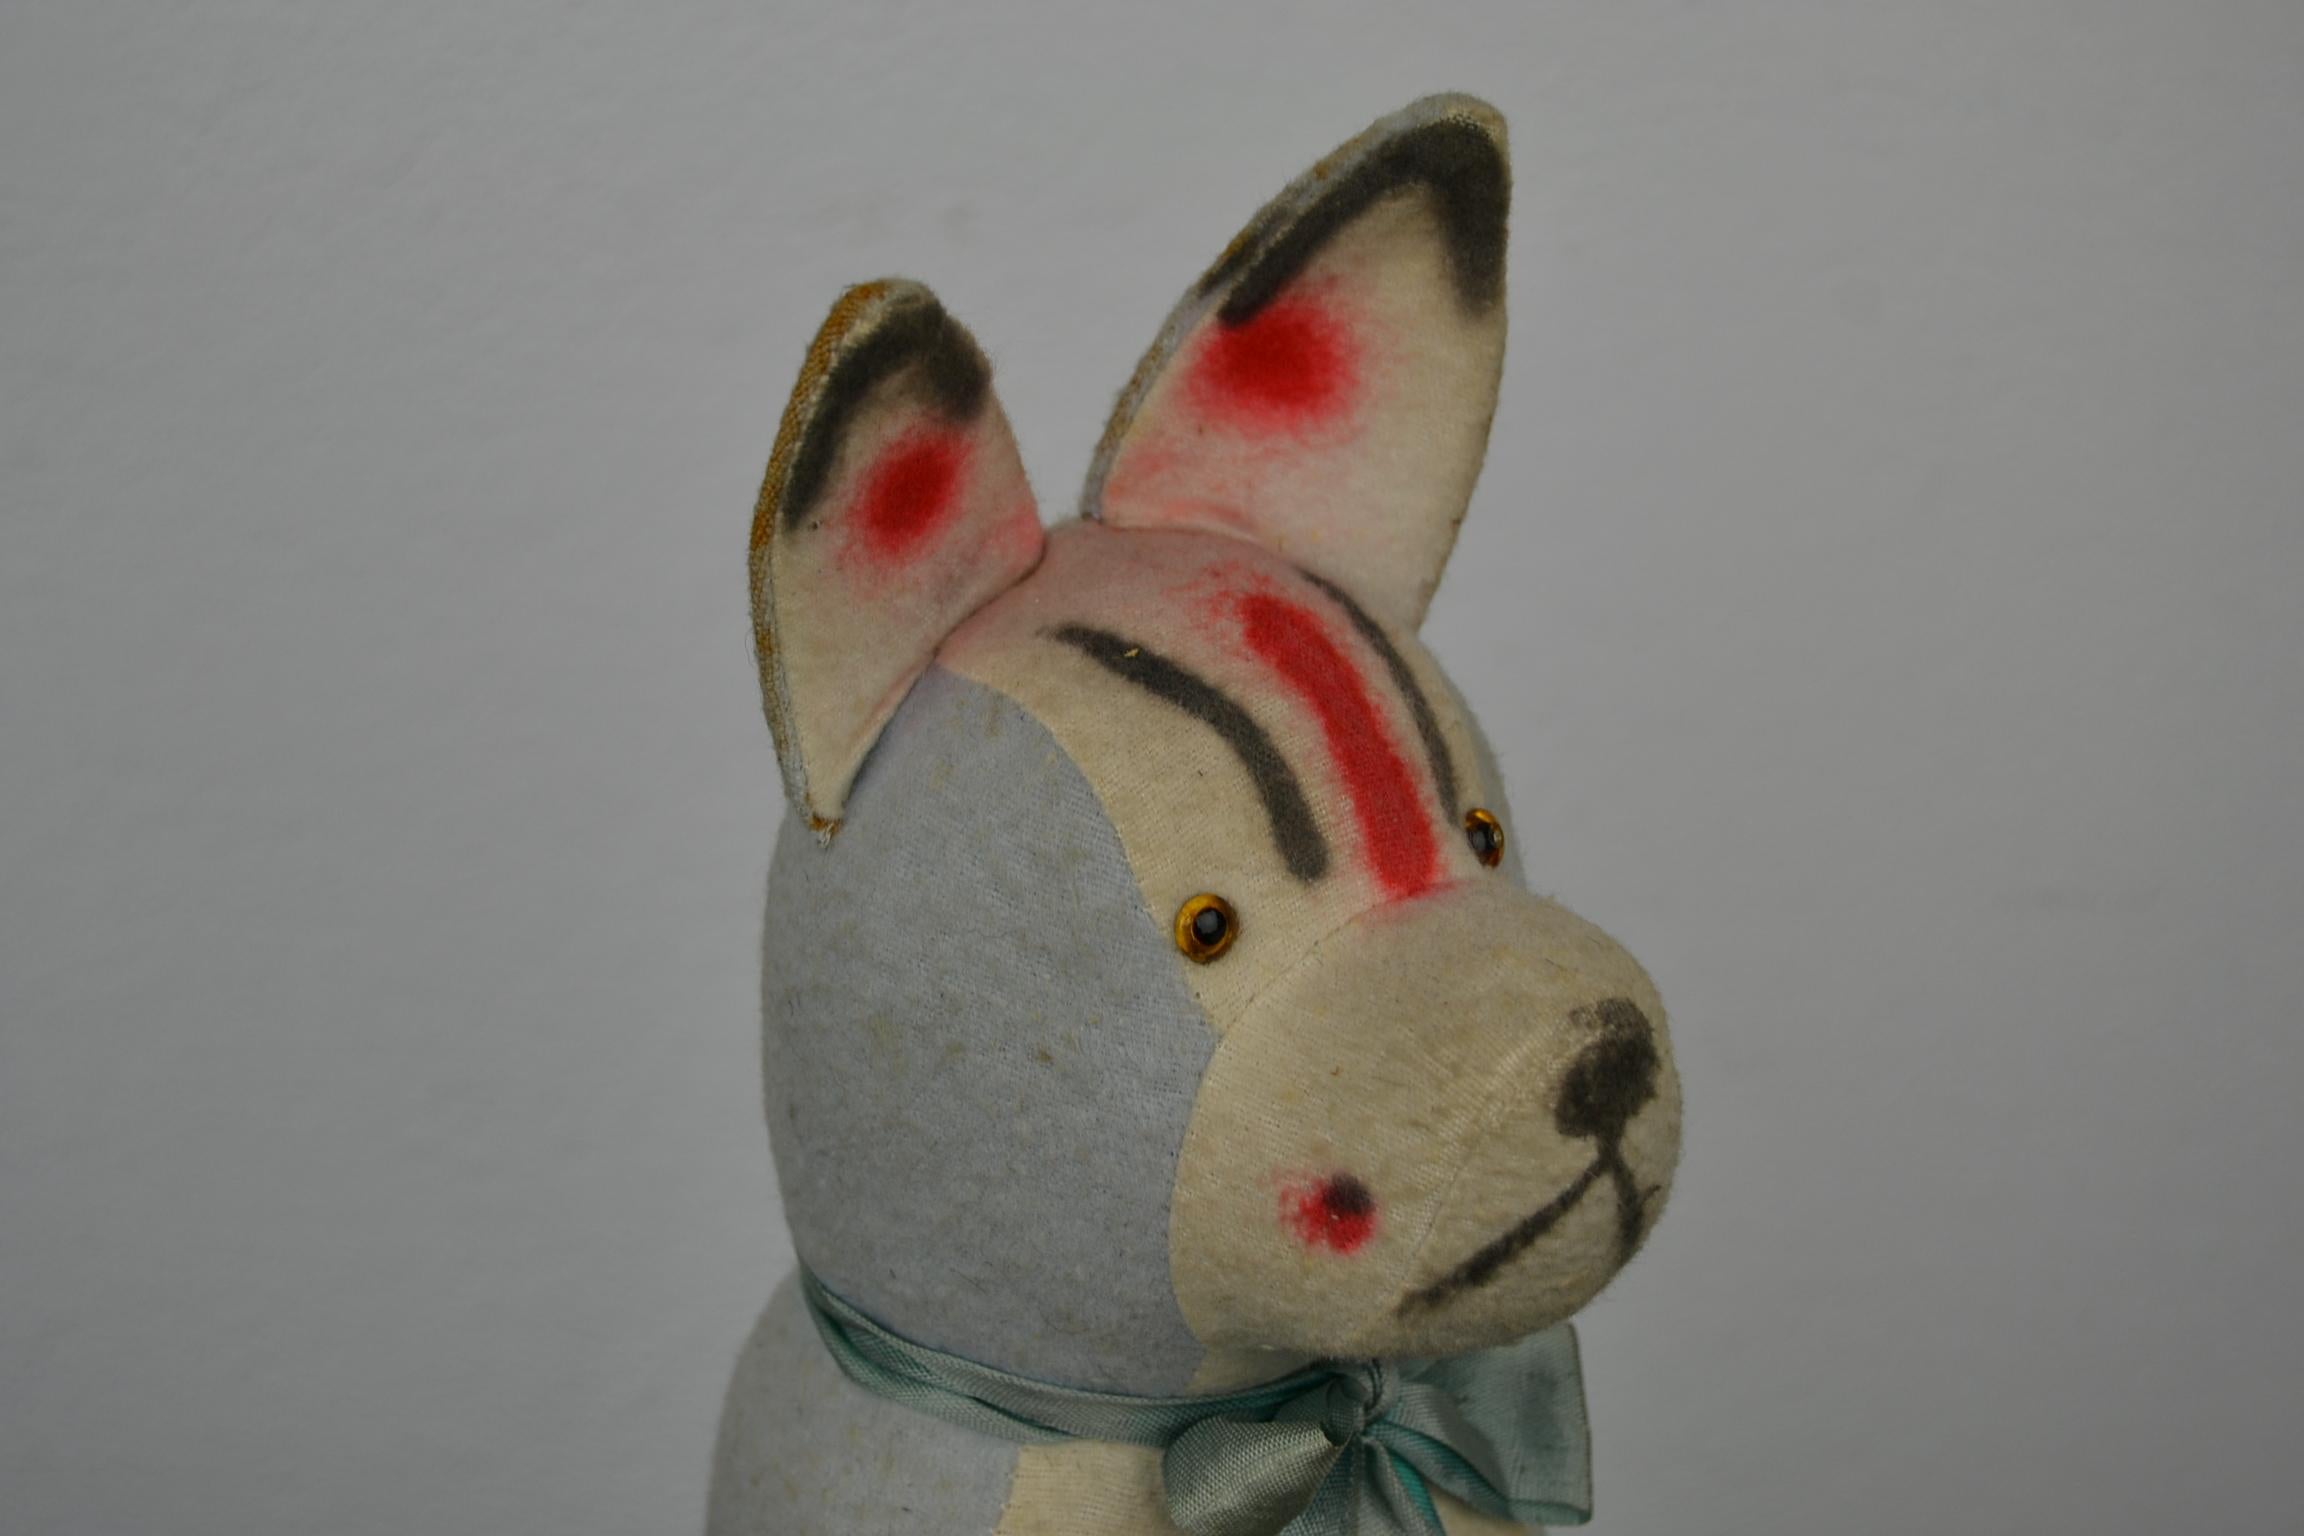 Antique German Stuffed toy in the shape of a French bulldog dog. This antique toy is stuffed with straw, has glass eyes, metal wire in the ears to keep the ears up. This toy dates circa 1920s-1930s. This handmade toy was made in Germany. The fabric